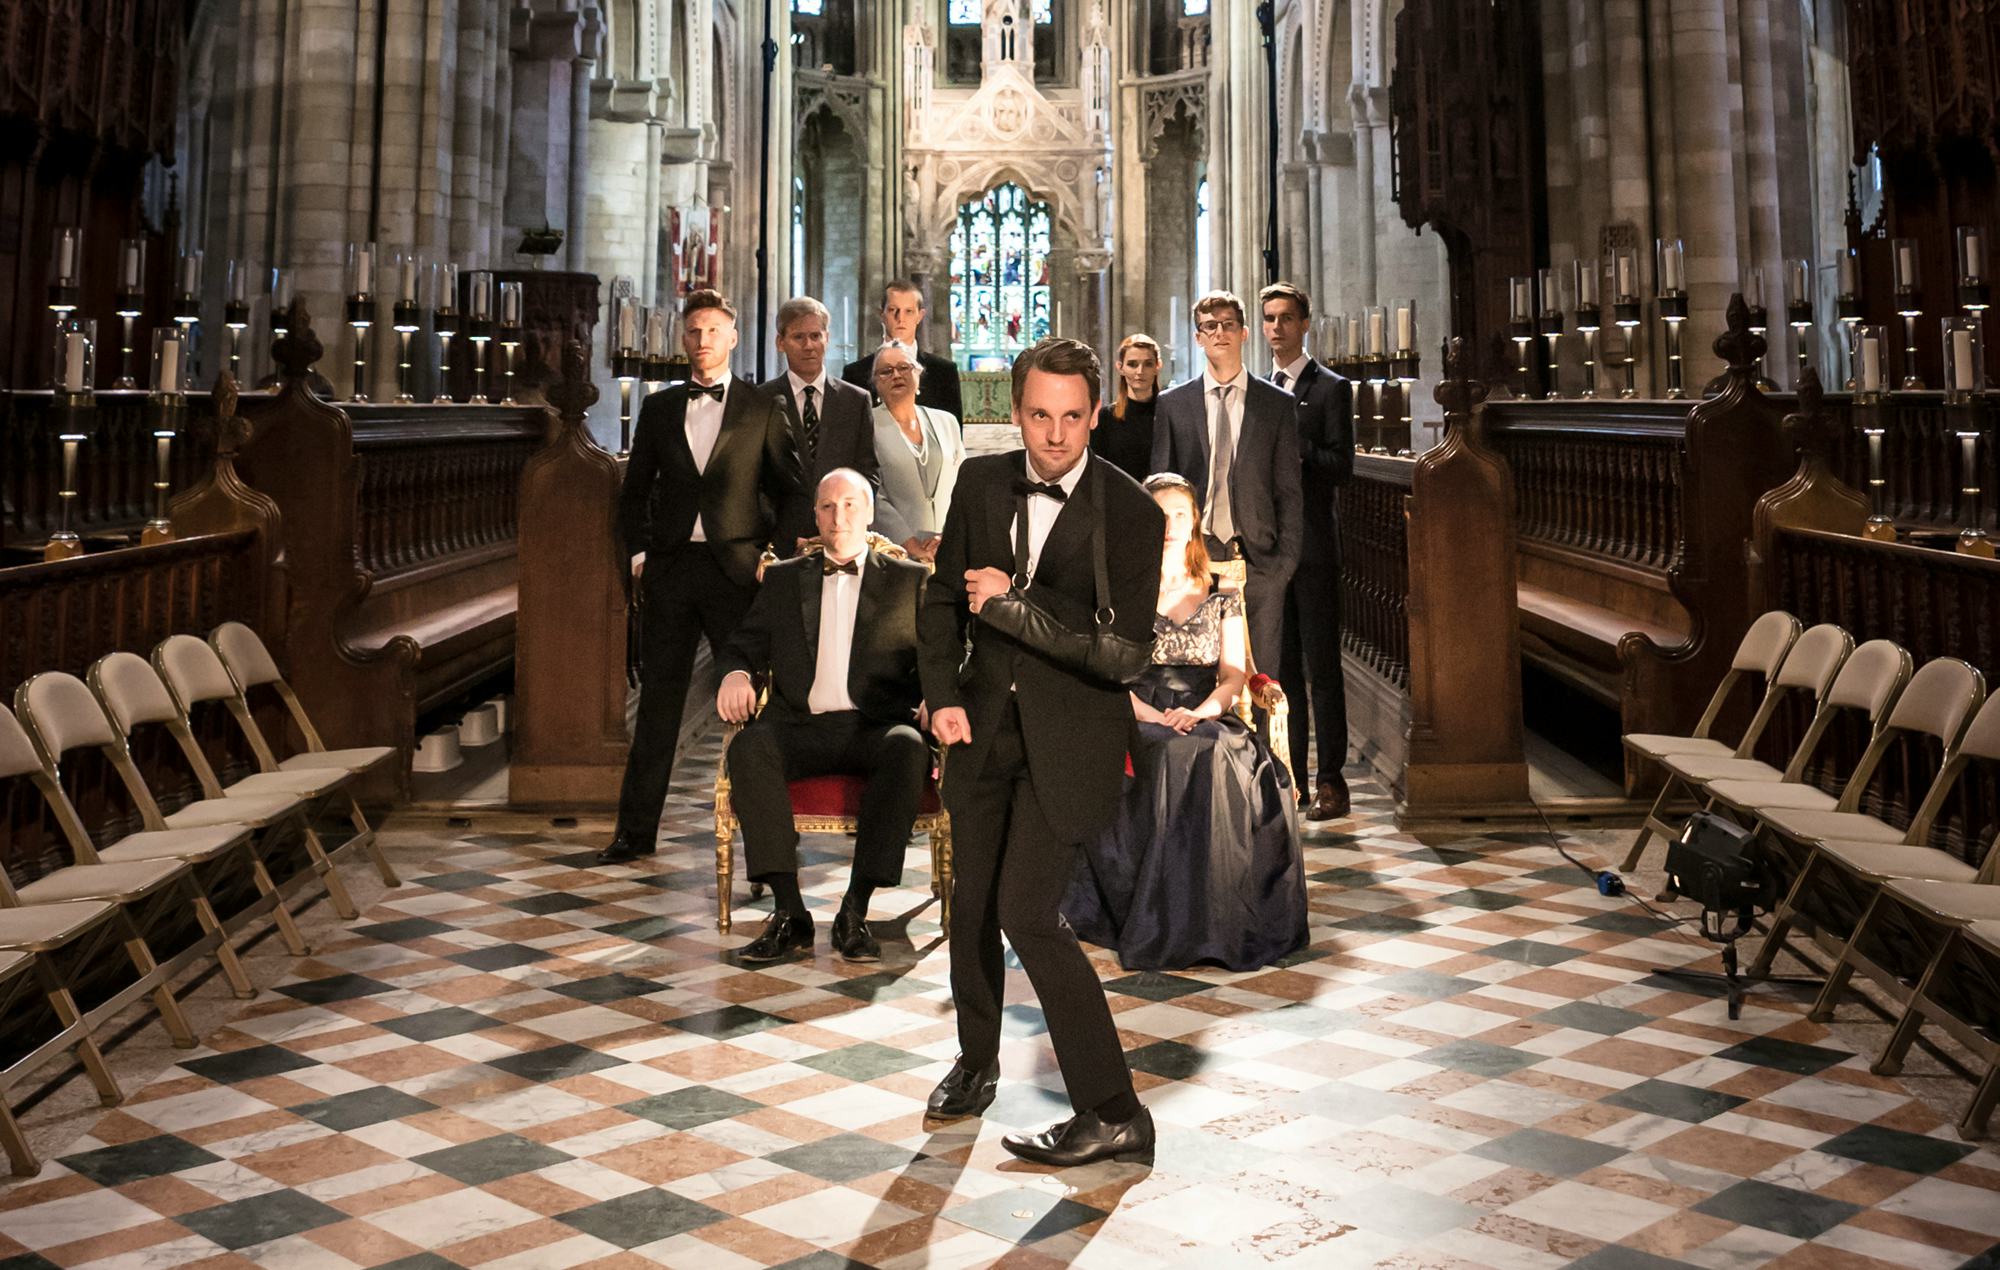 Richard III theatre review Antic Disposition Temple Church